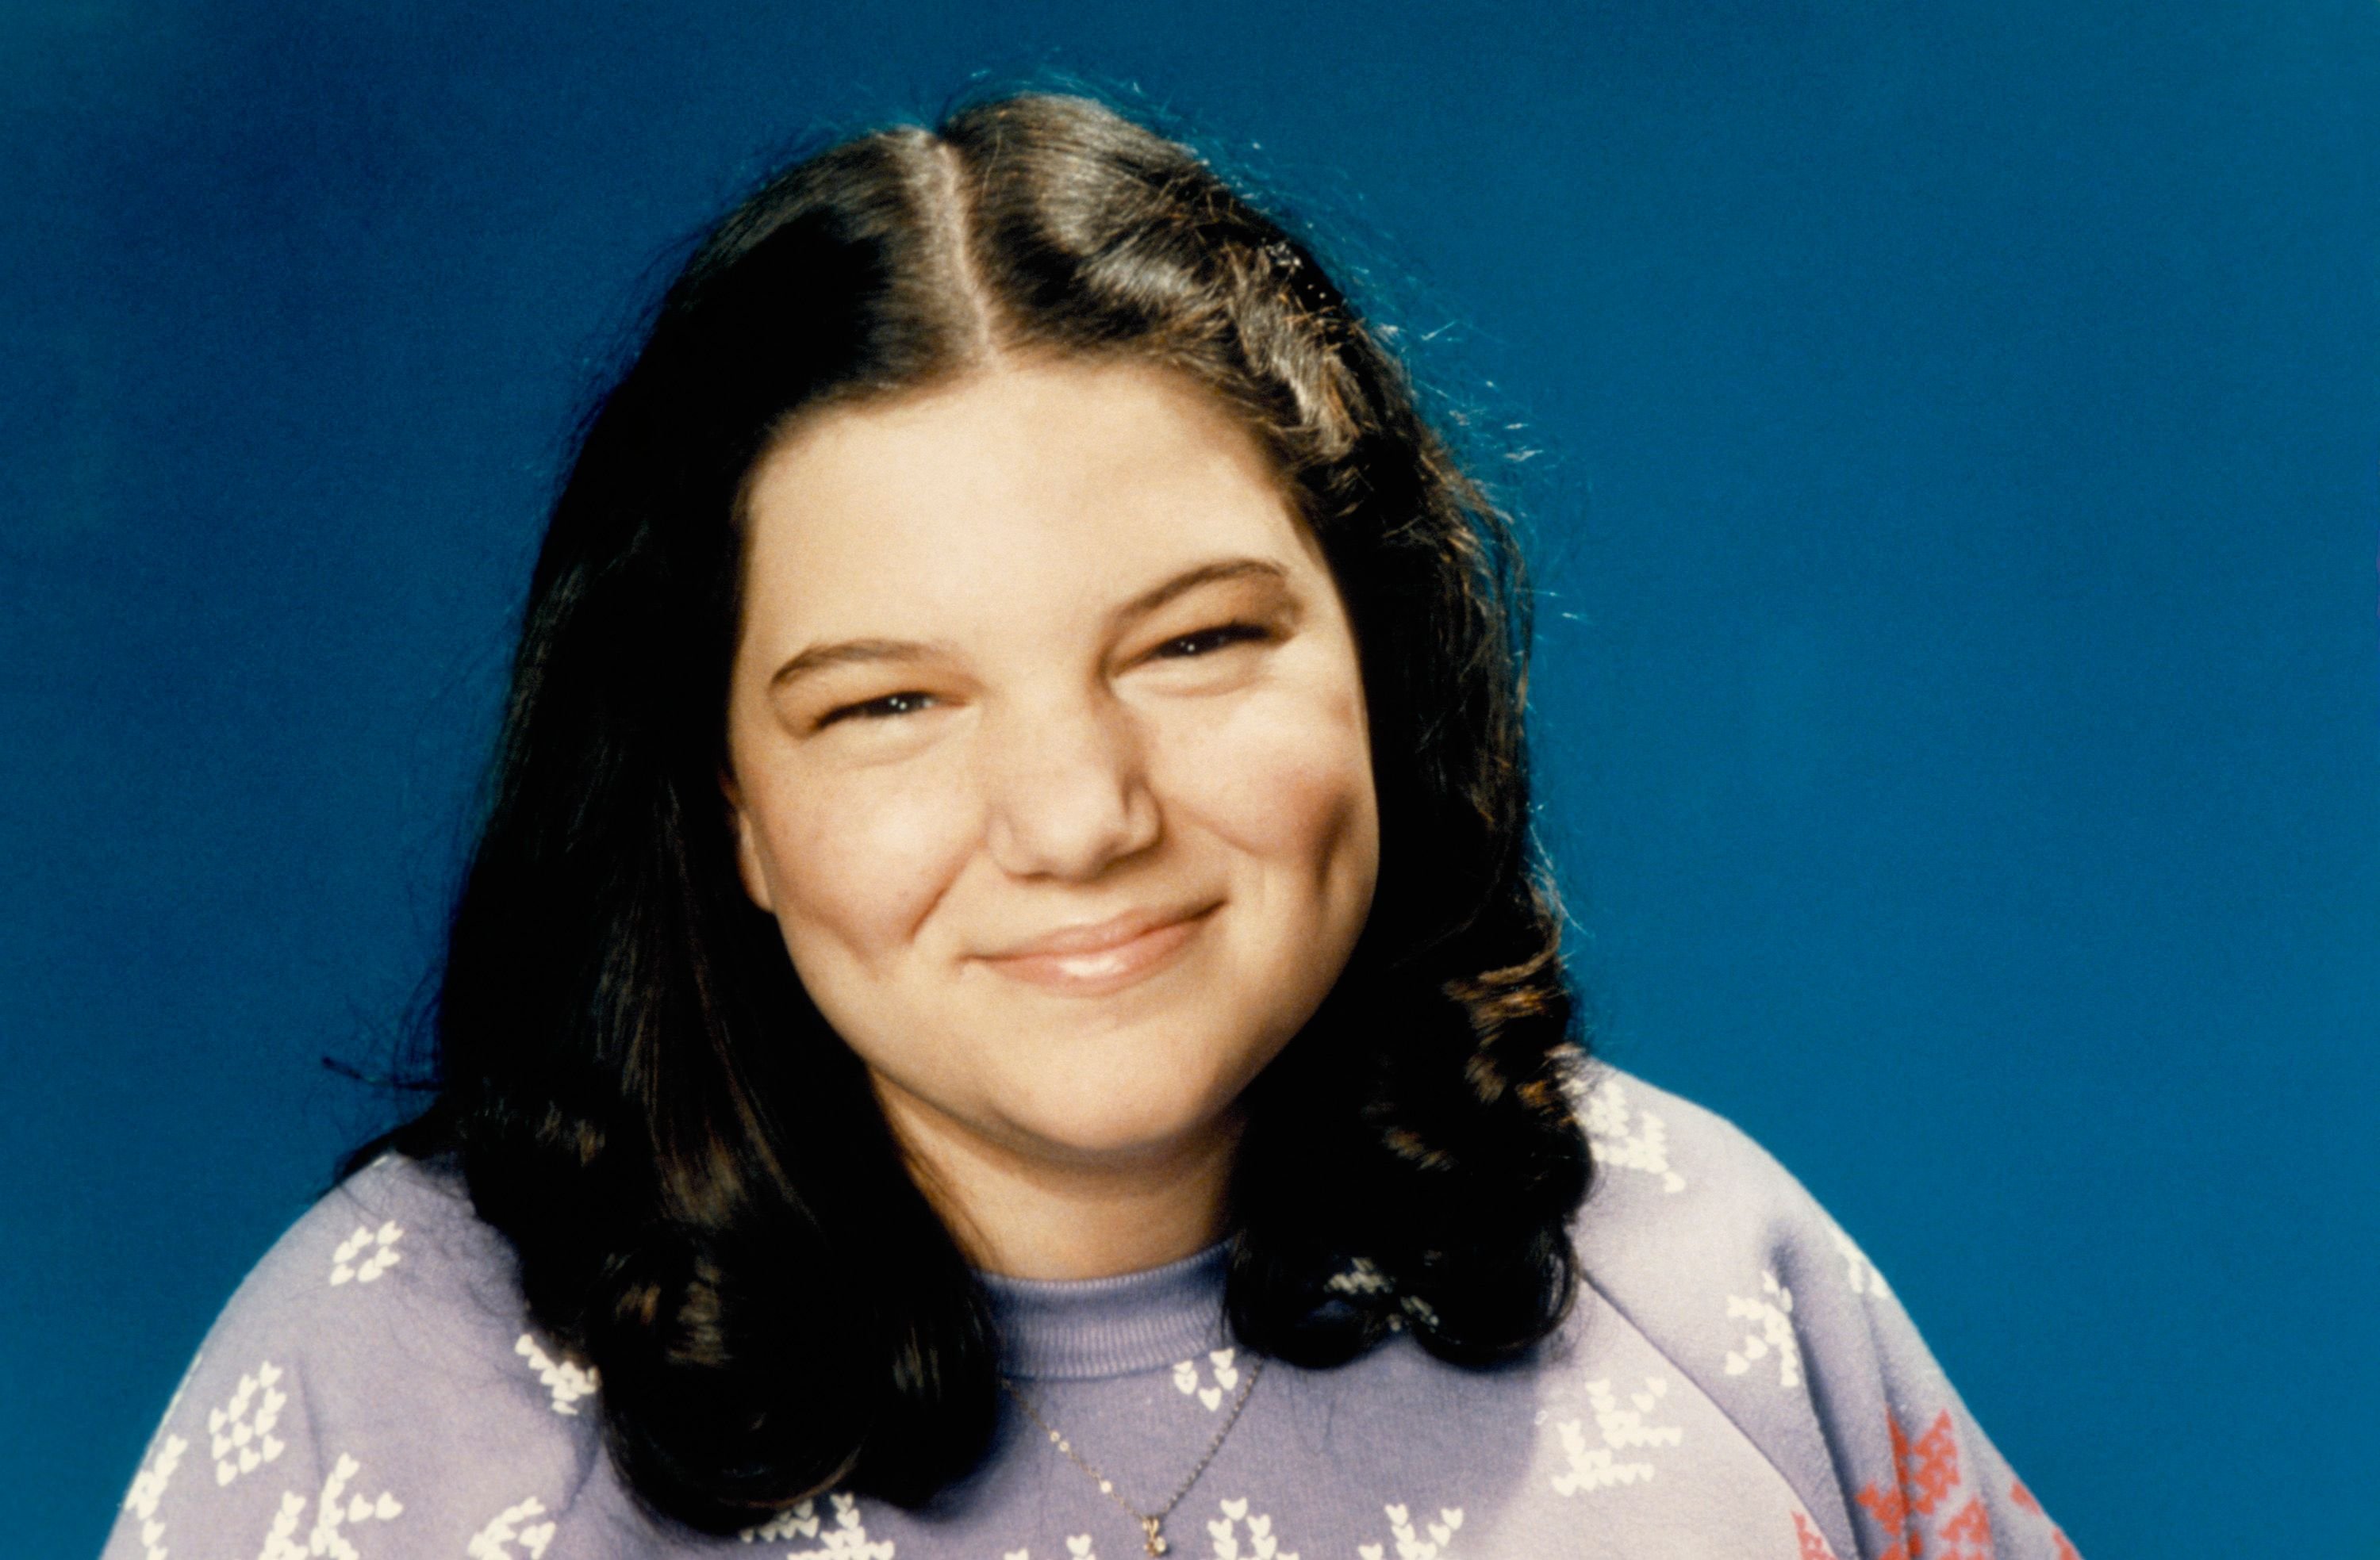 Mindy Cohn as Natalie Letisha Sage Green on season 2 of "The Facts of Life" in 1980. | Source: Herb Ball/NBCU Photo Bank/NBCUniversal/Getty Images